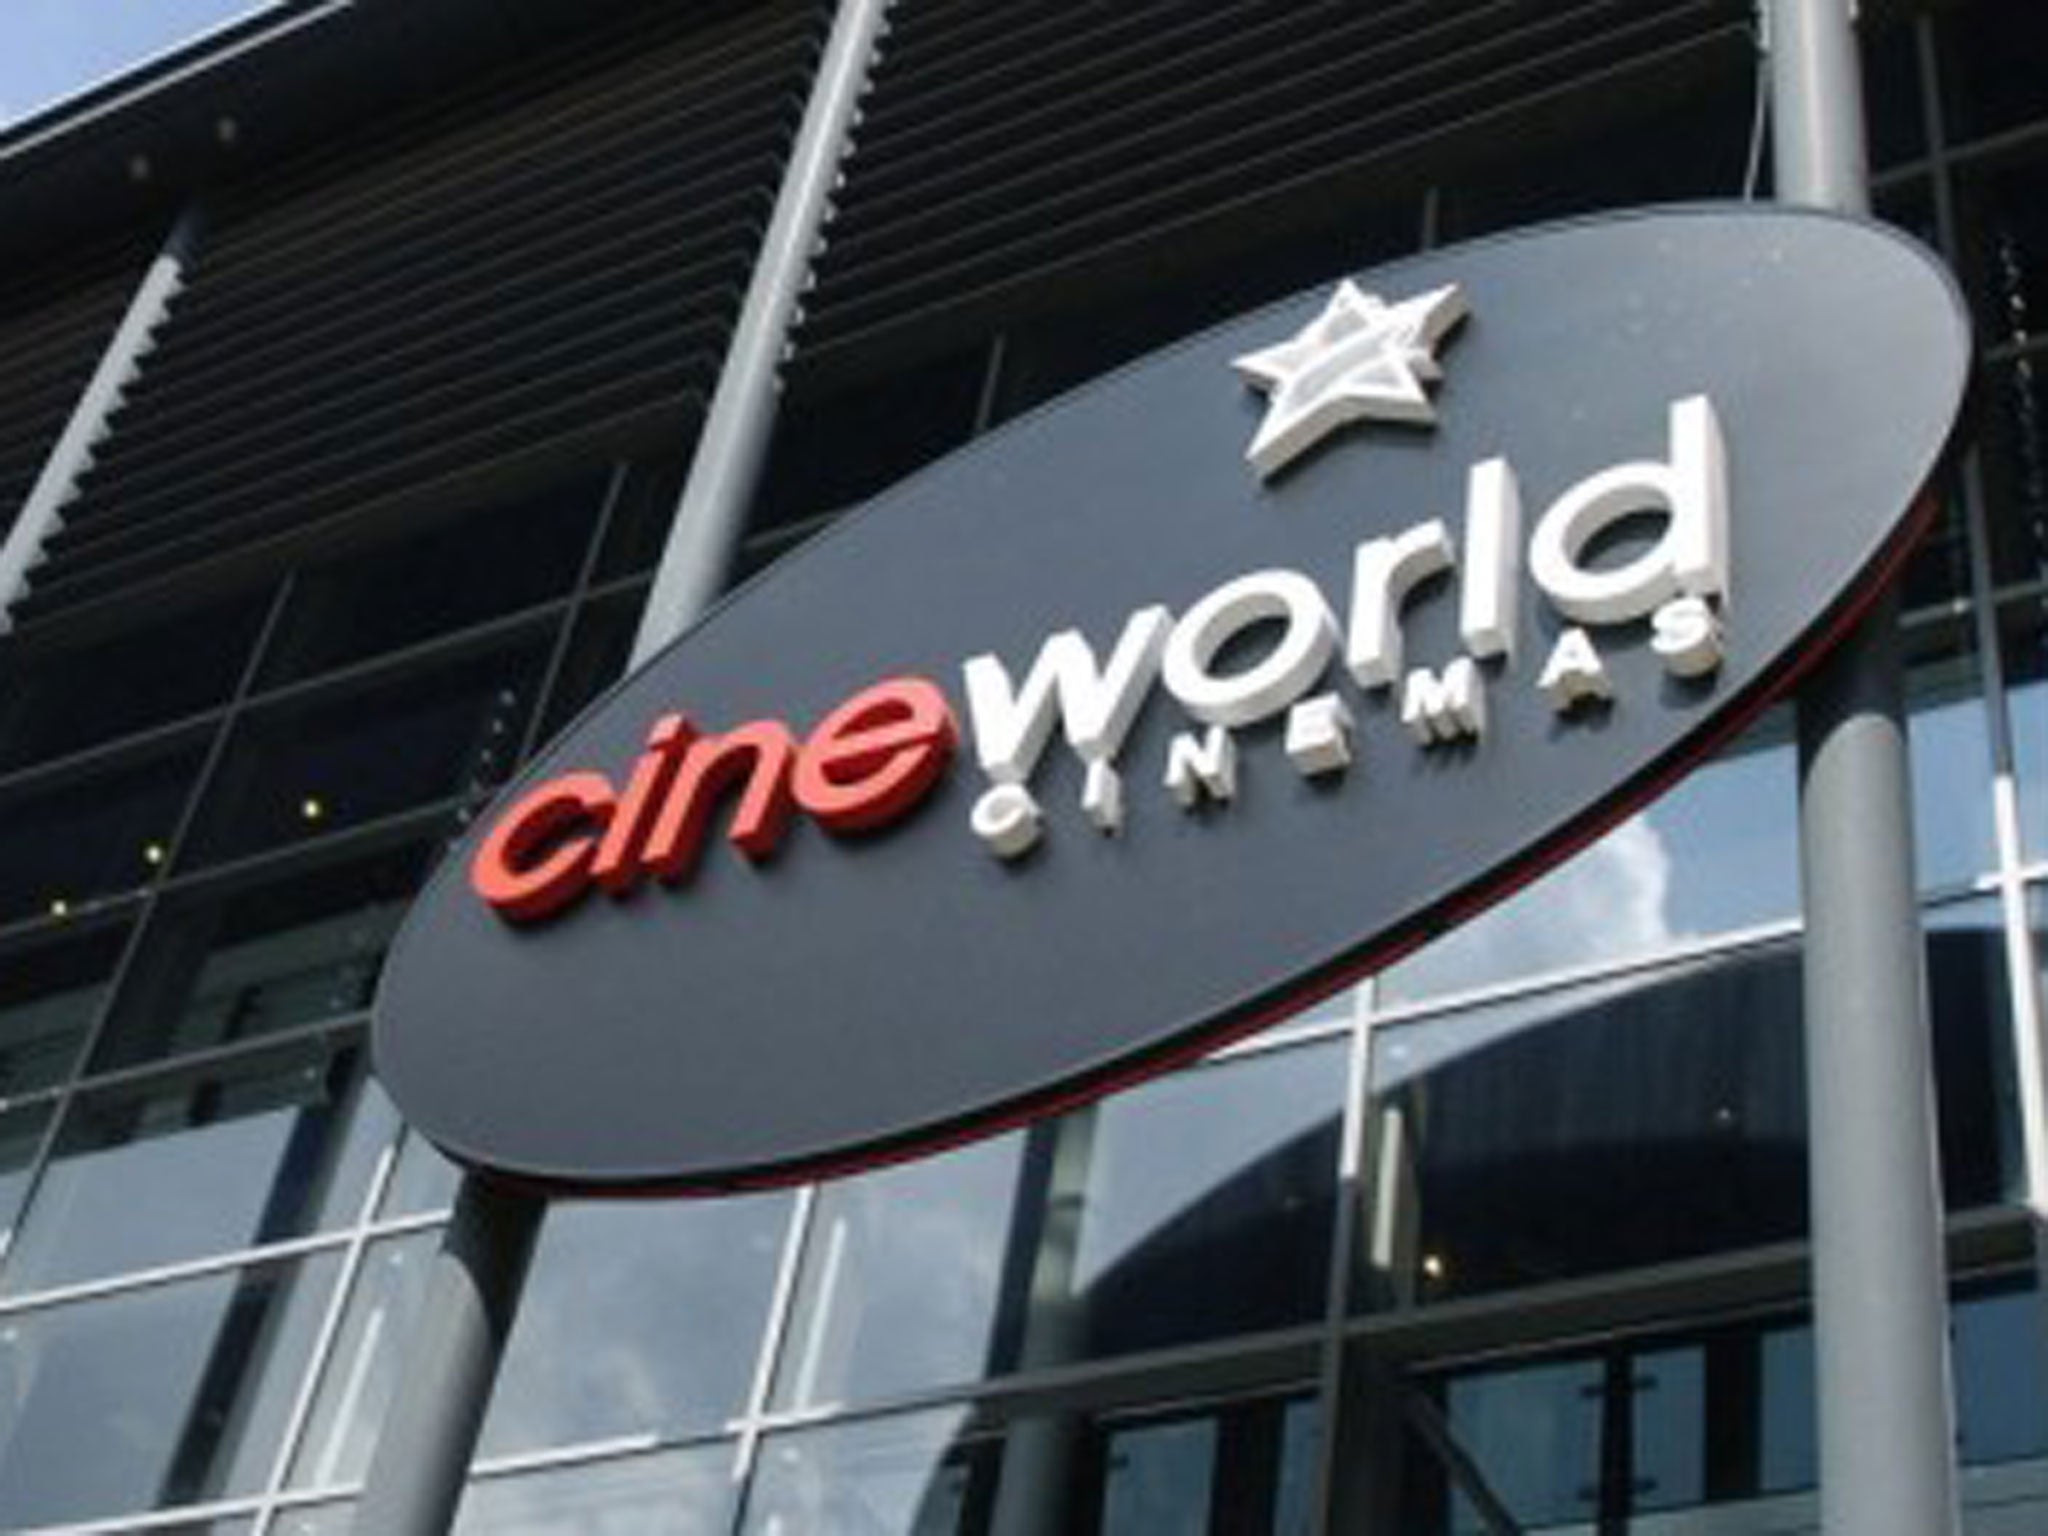 Cineworld stands tall with a 4.5 per cent yield as well as strong earnings growth of 12 per cent a year